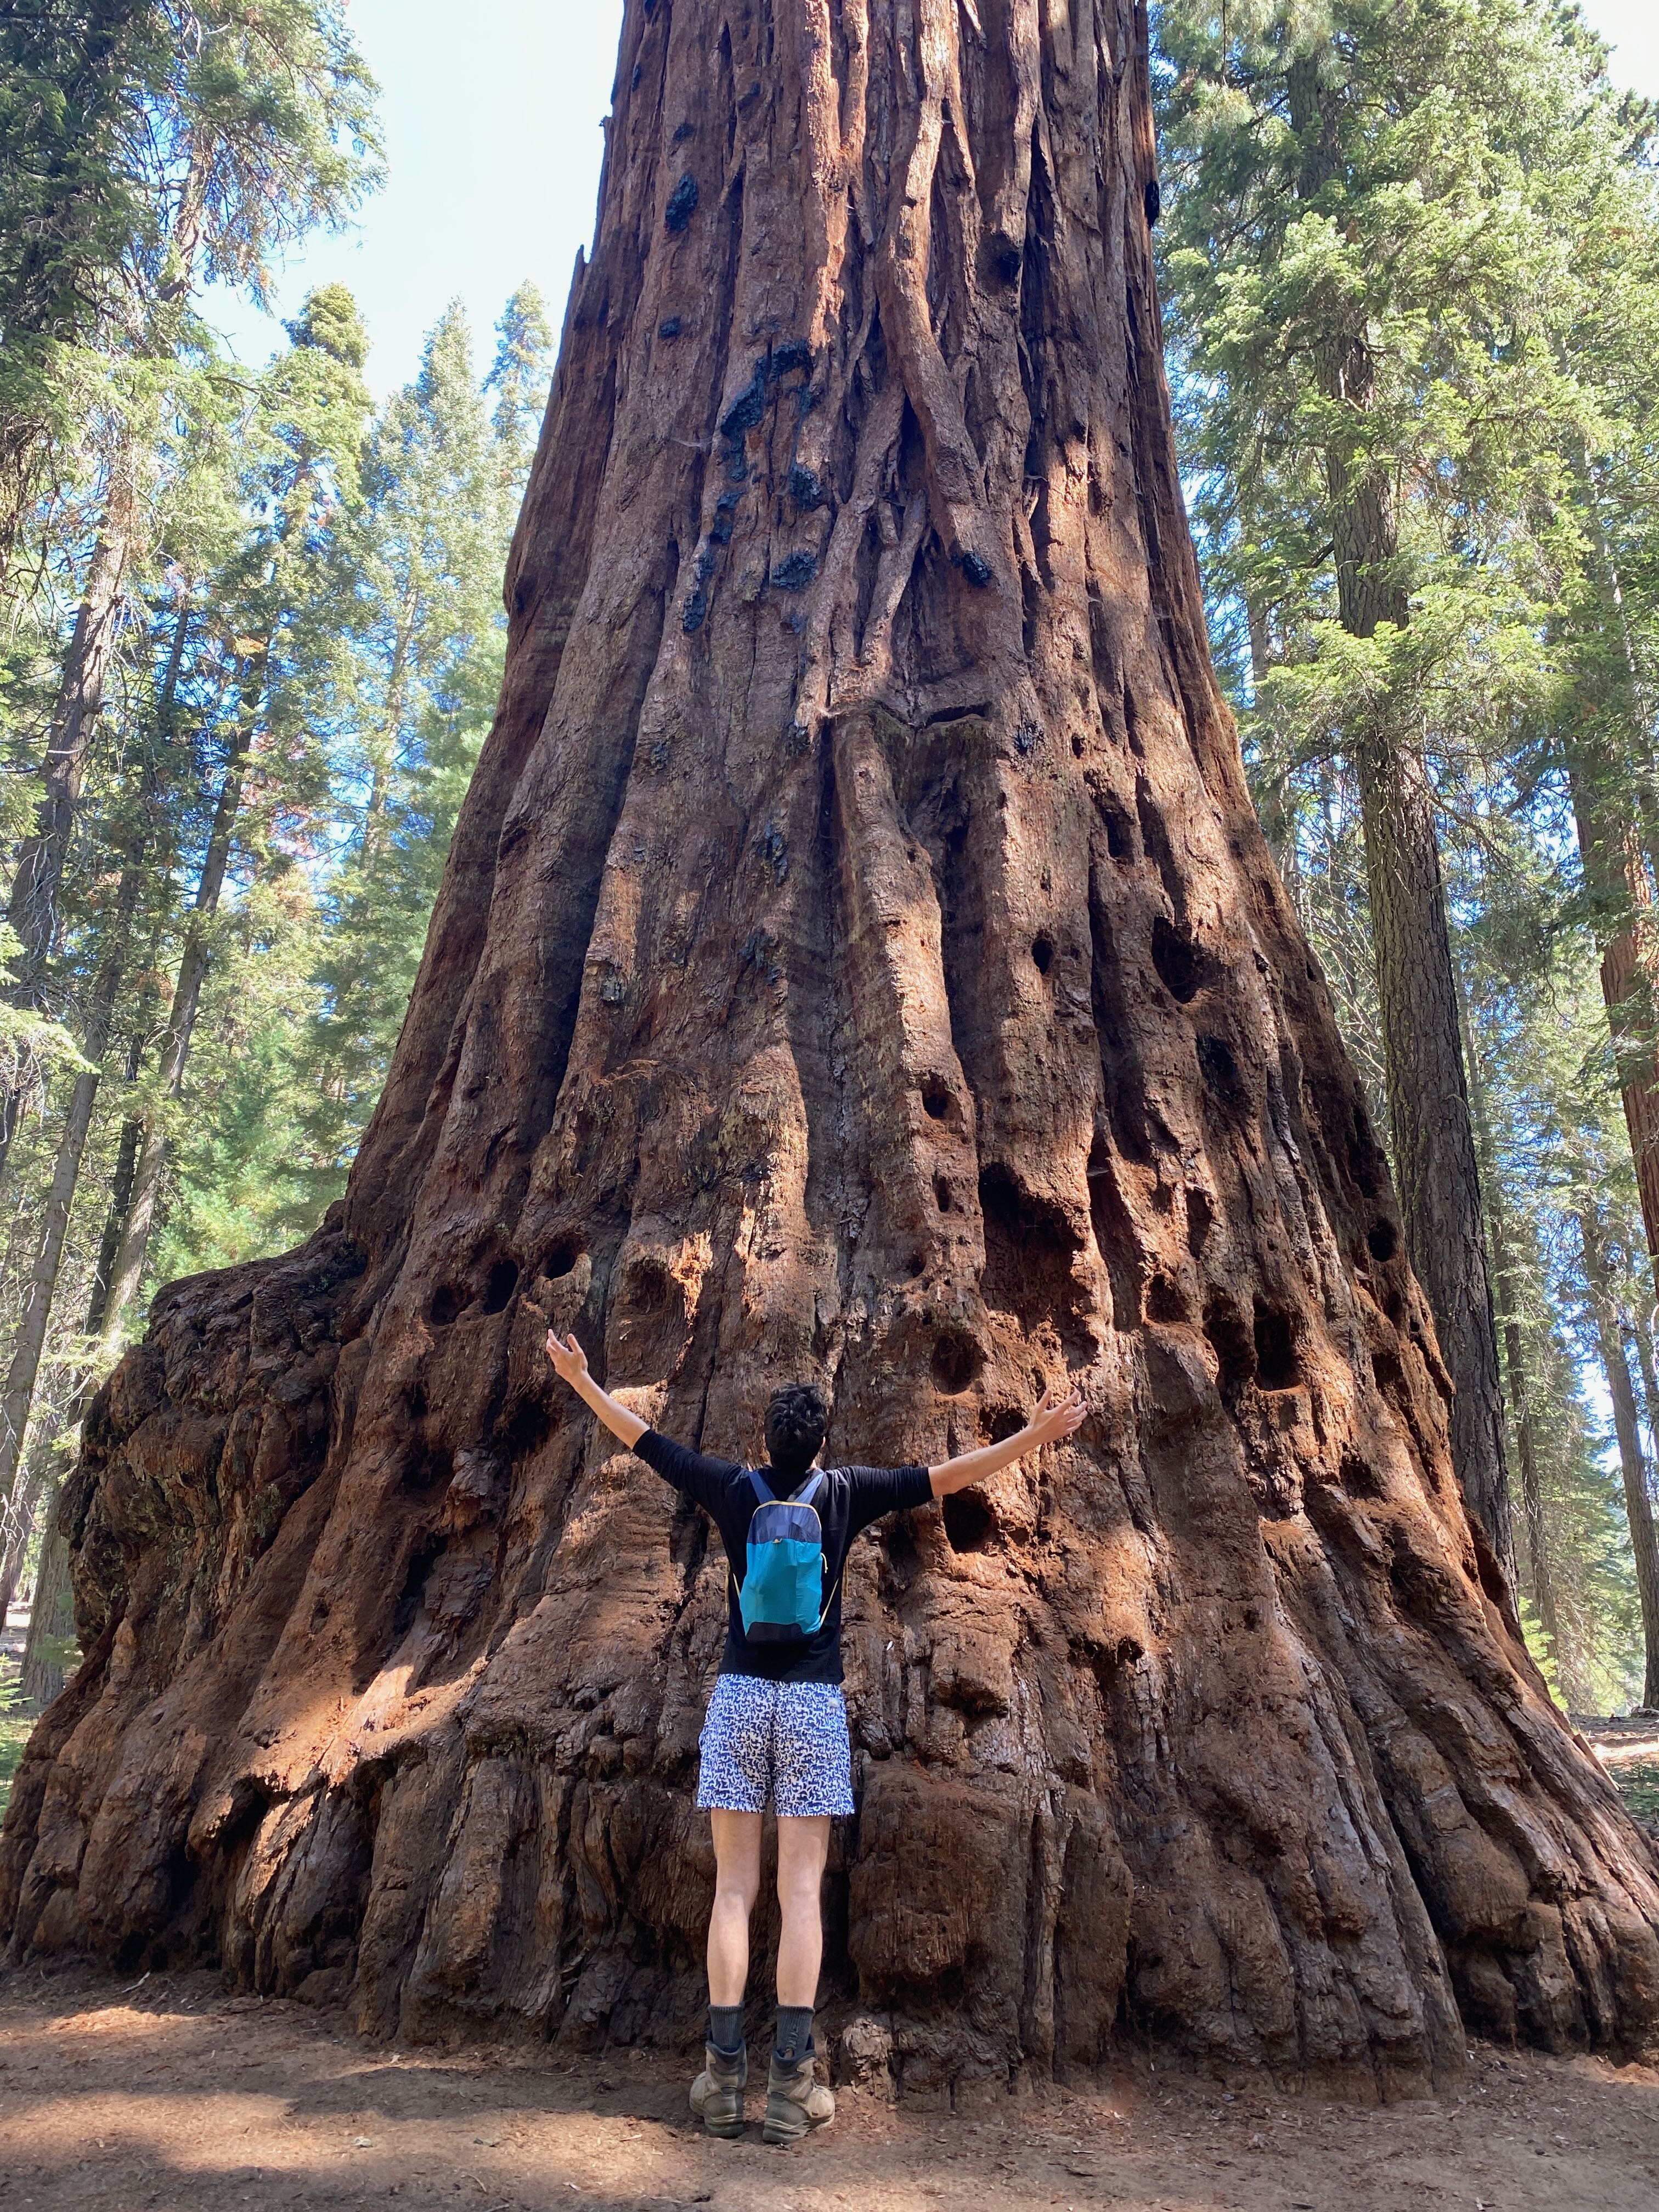 In front of a giant sequoia in the national park of the same name